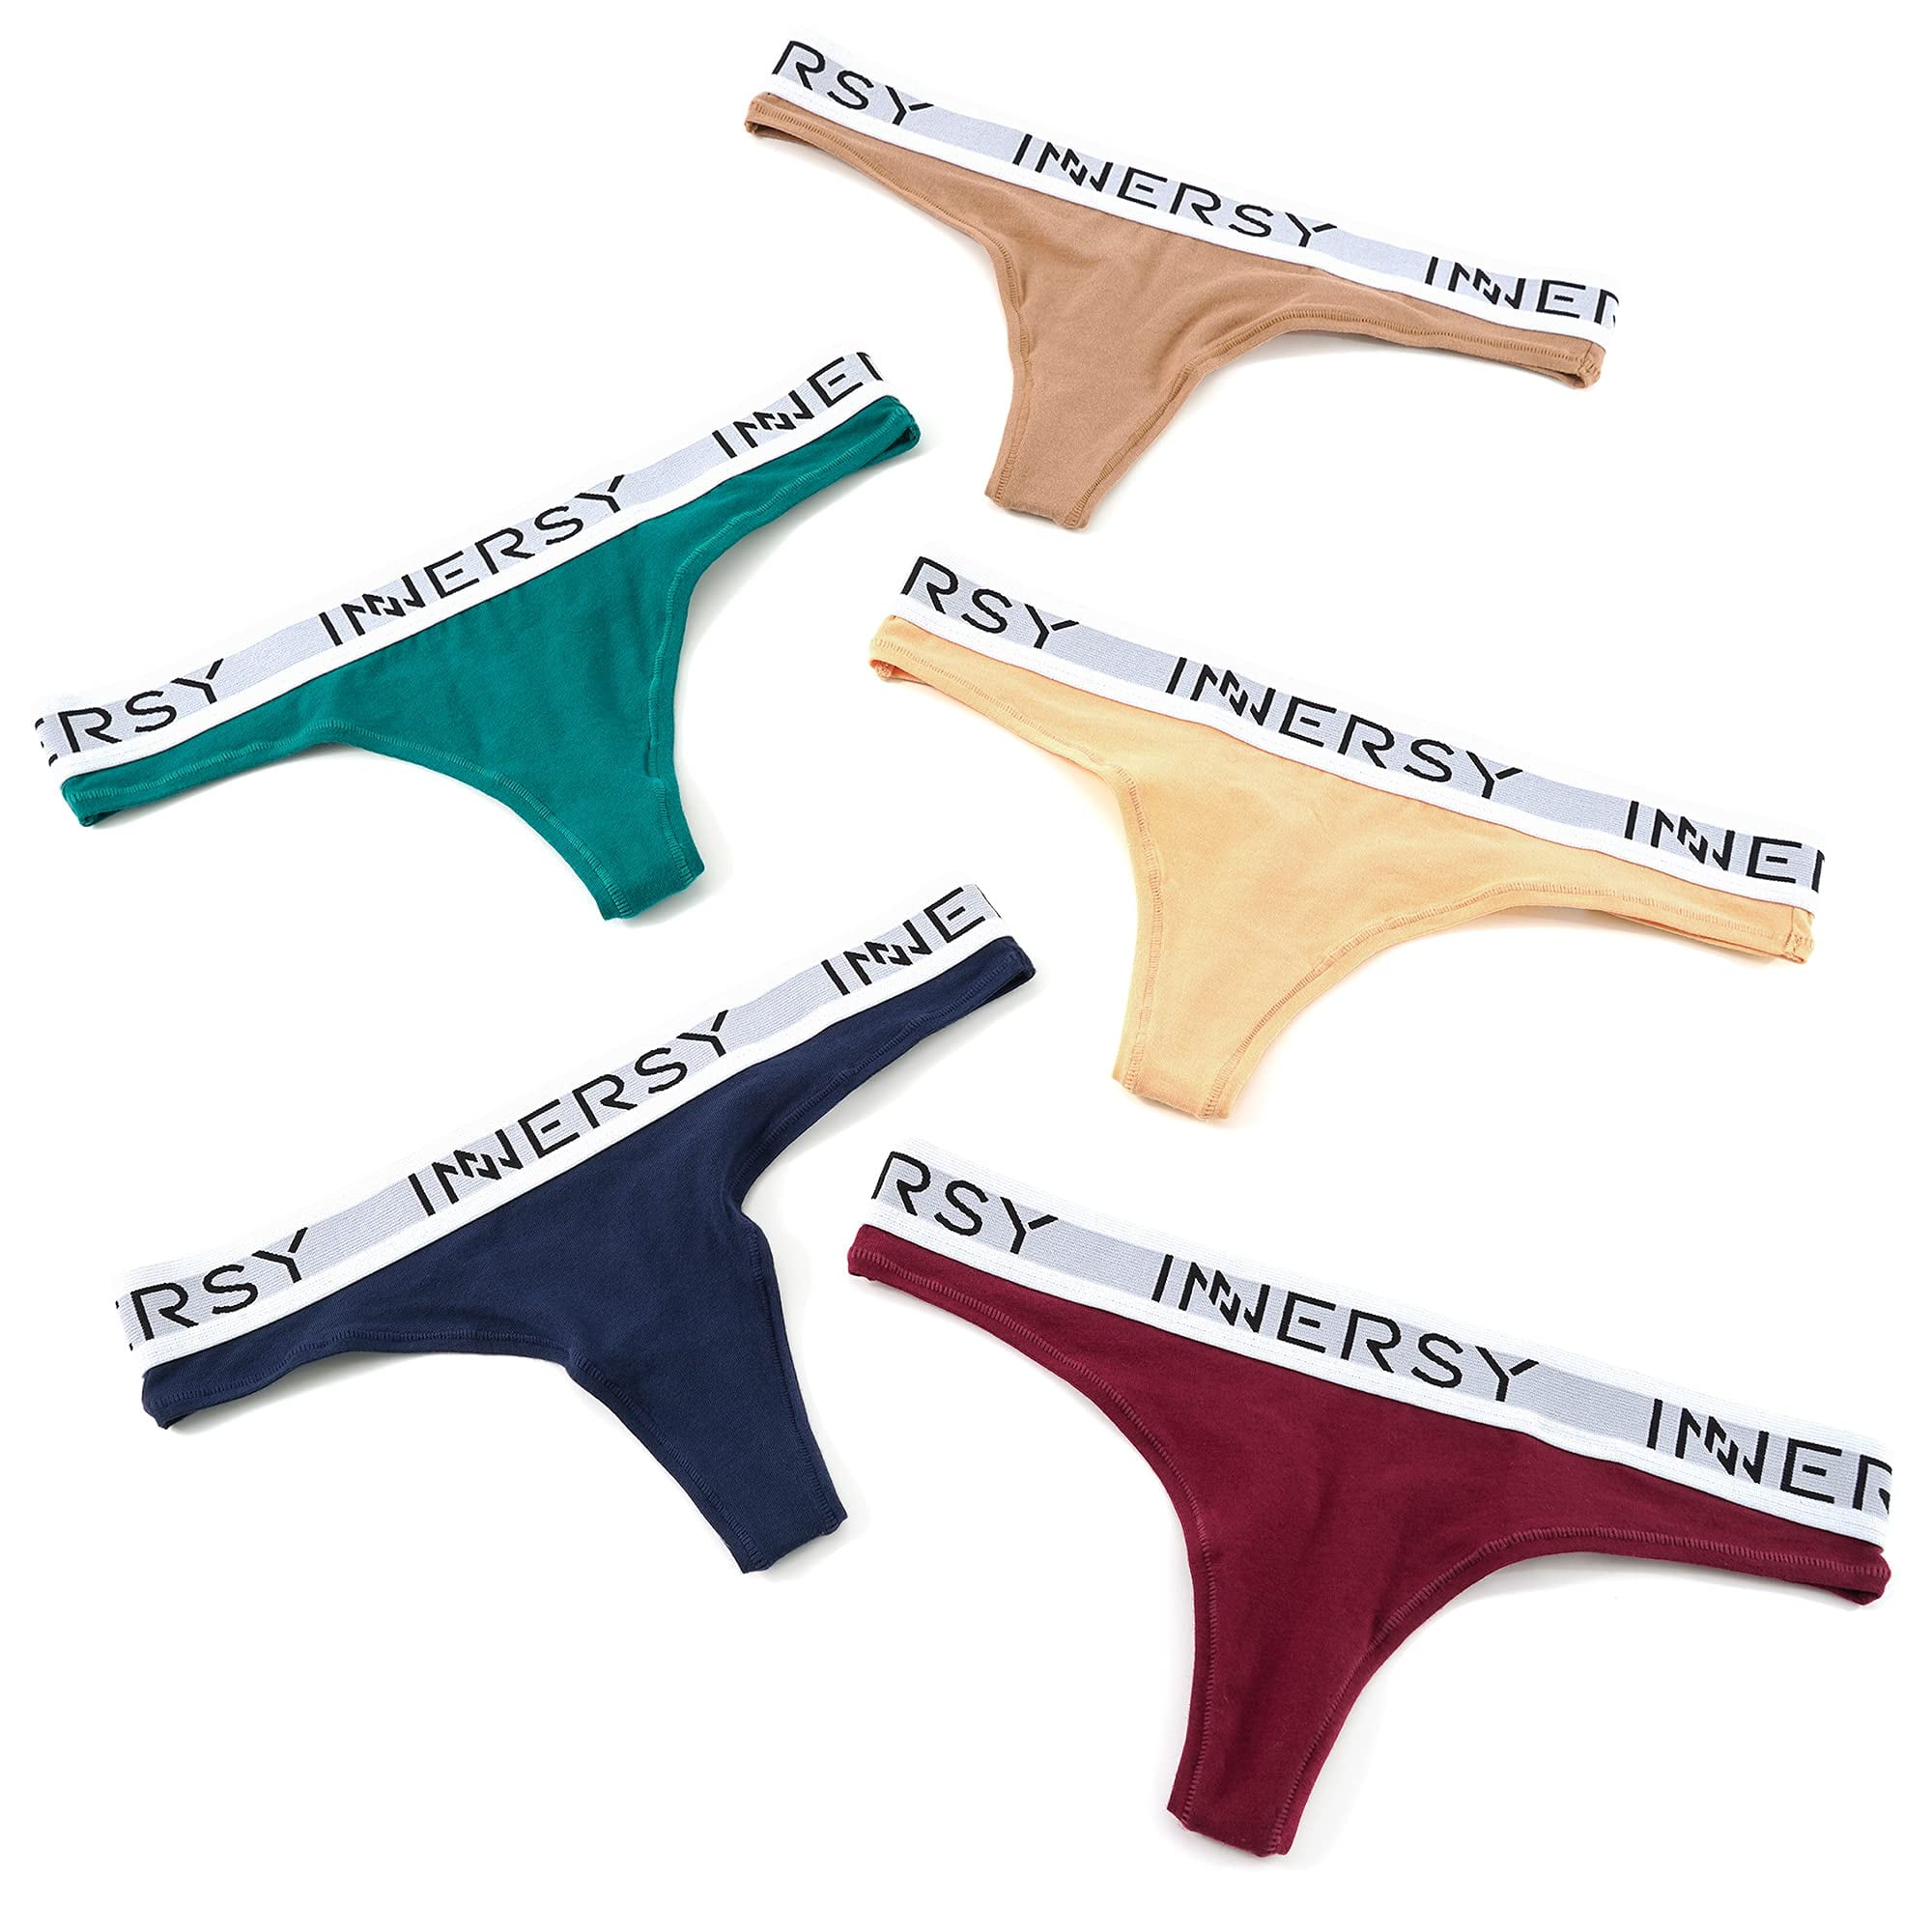 INNERSY Women's Thong Panty Cotton Sporty Thong Underwear 5-Pack (L, Vivid)